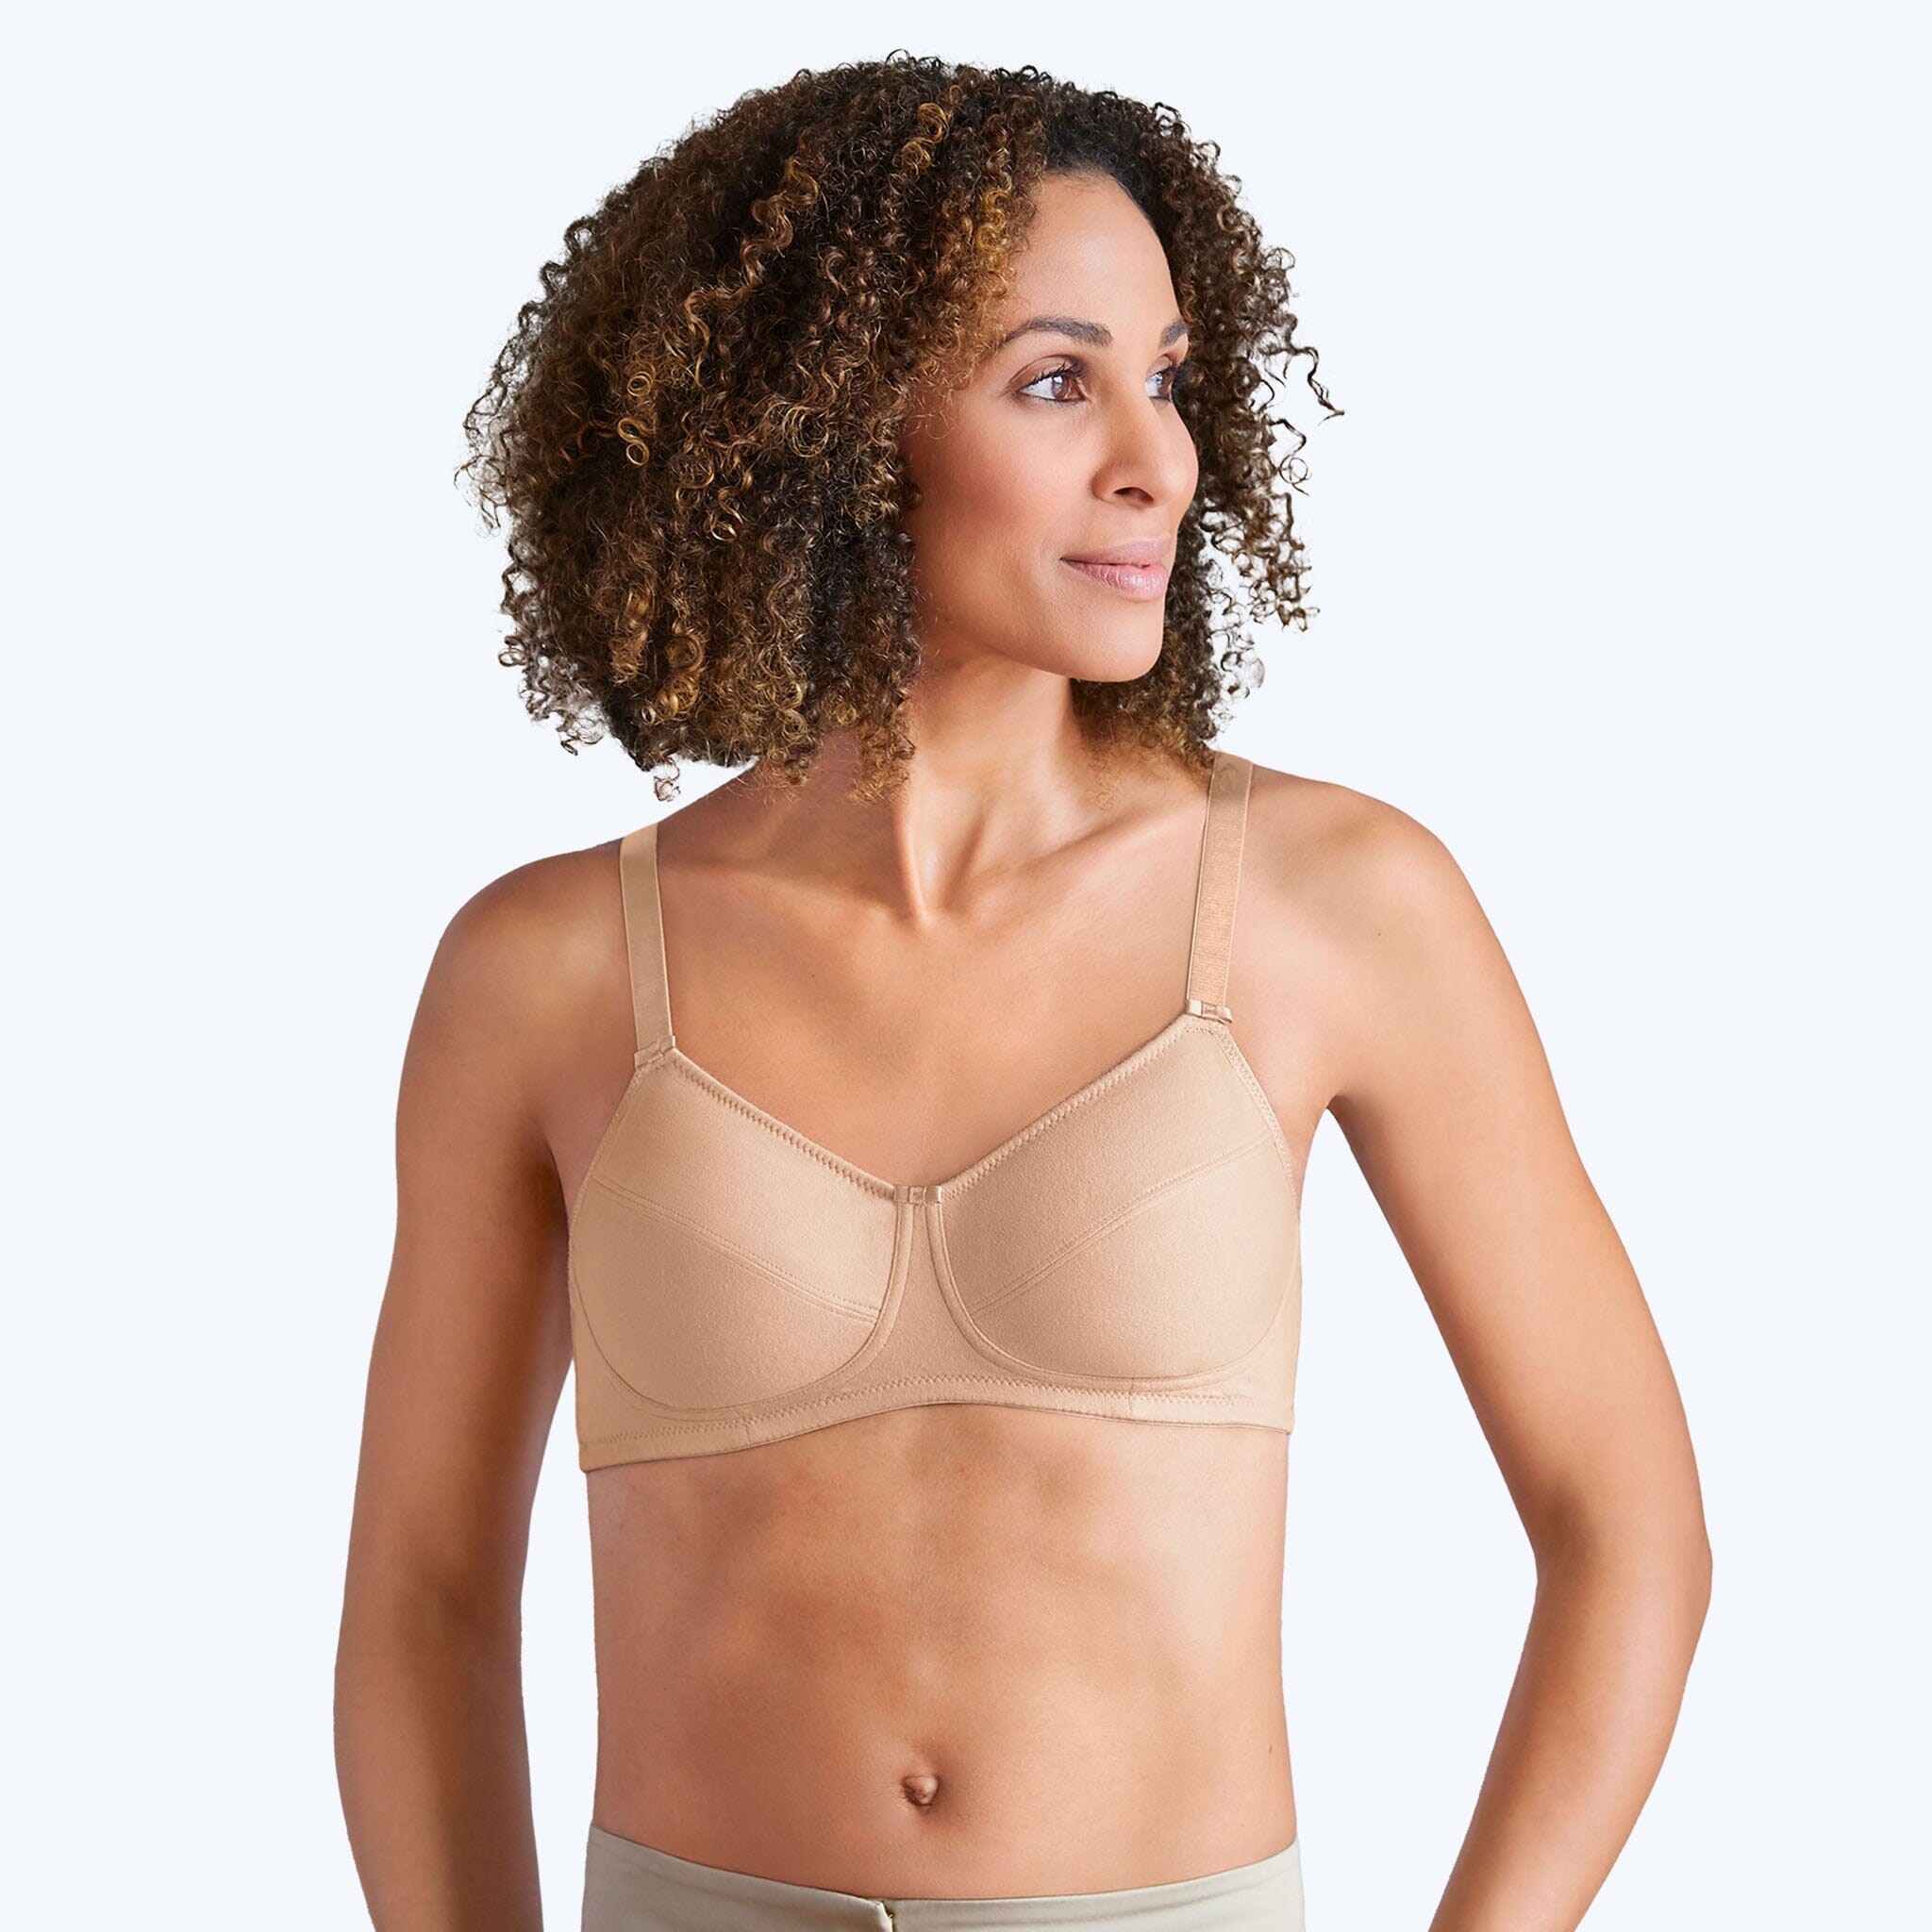 Front Hook Cotton Post Mastectomy Bra – 32-44/cup